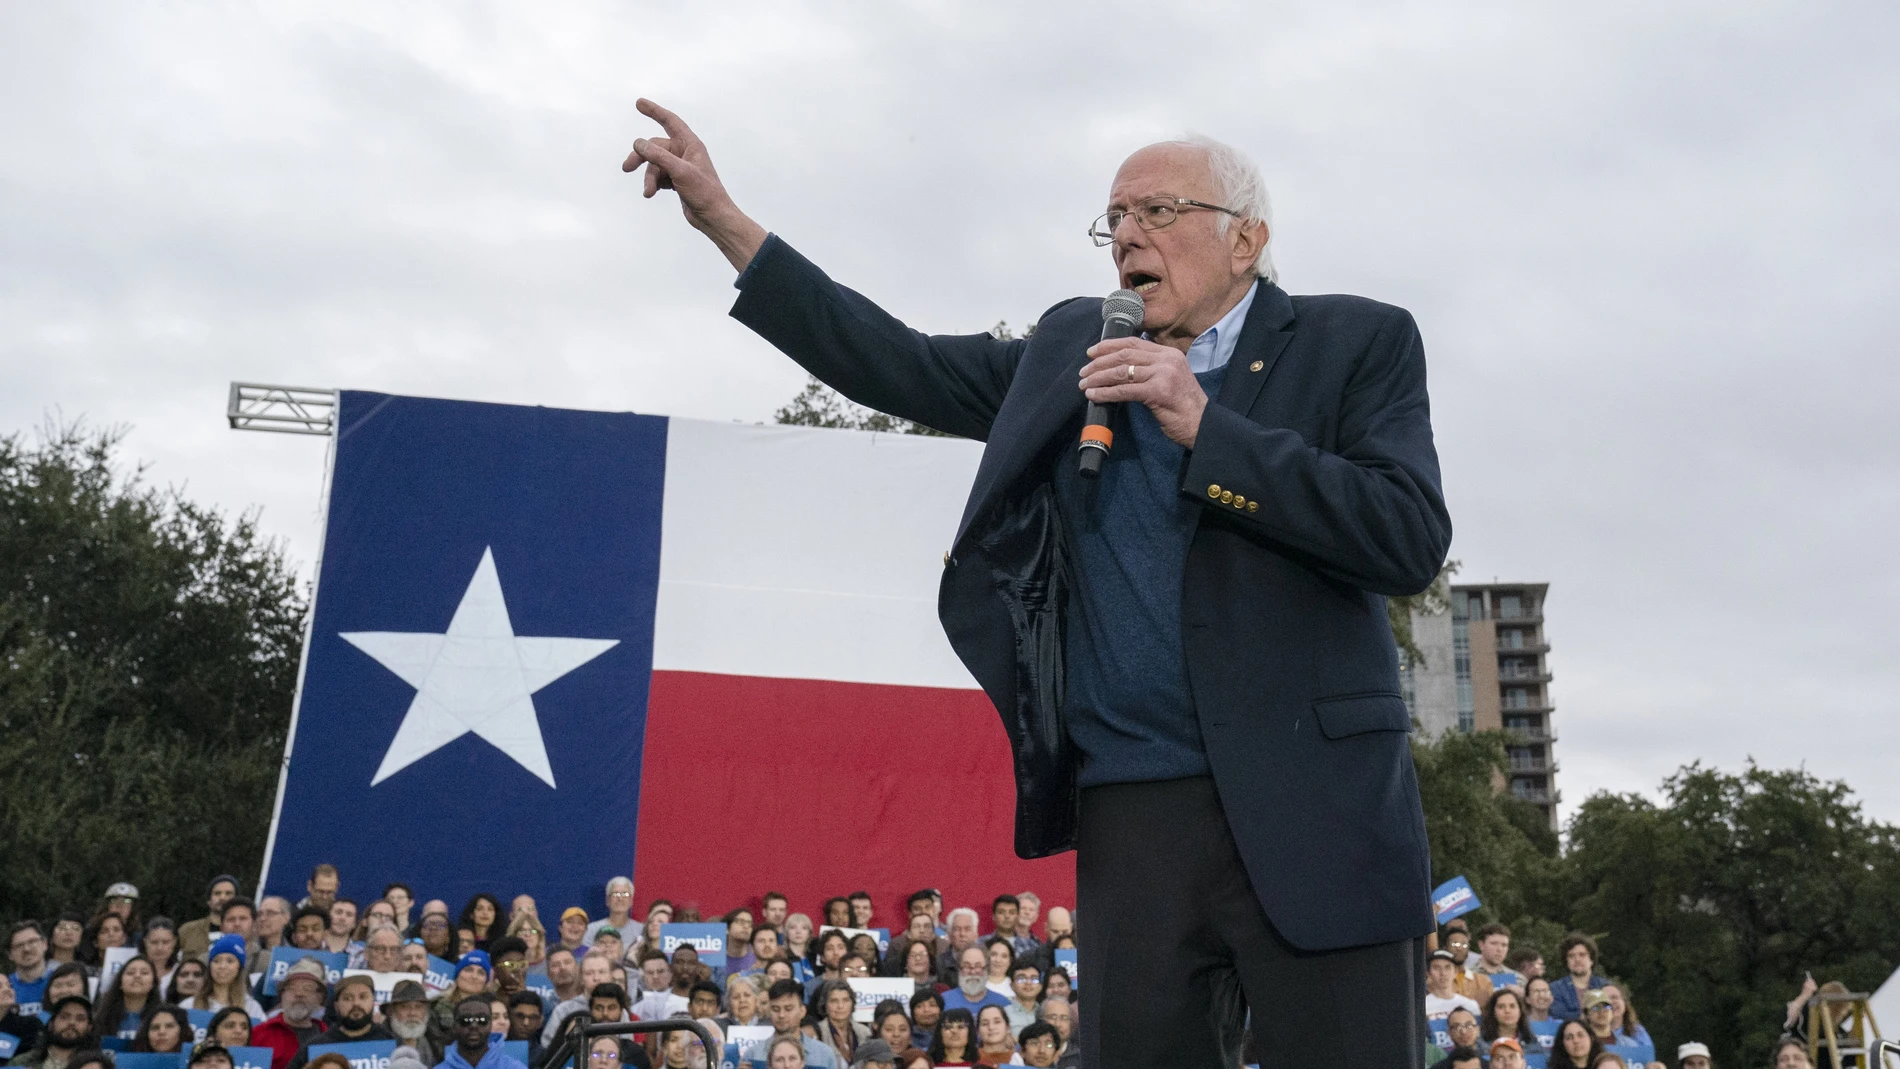 Thousands cheer Bernie Sanders at Texas campaign rally